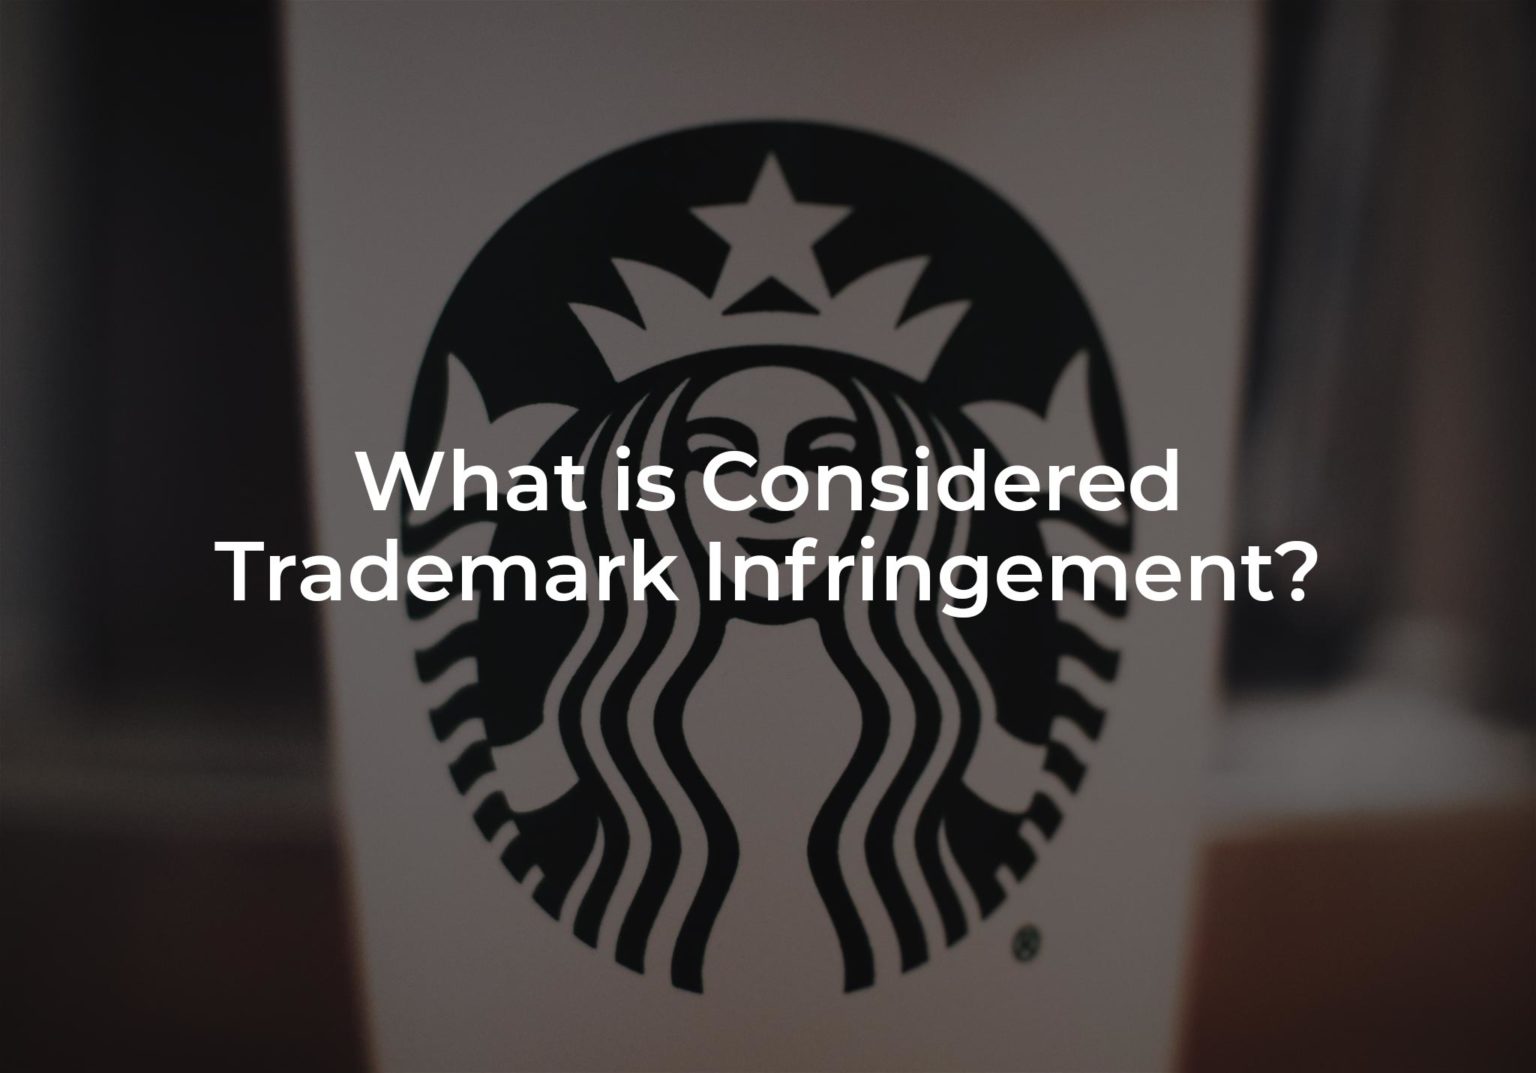 What is considered trademark infringement